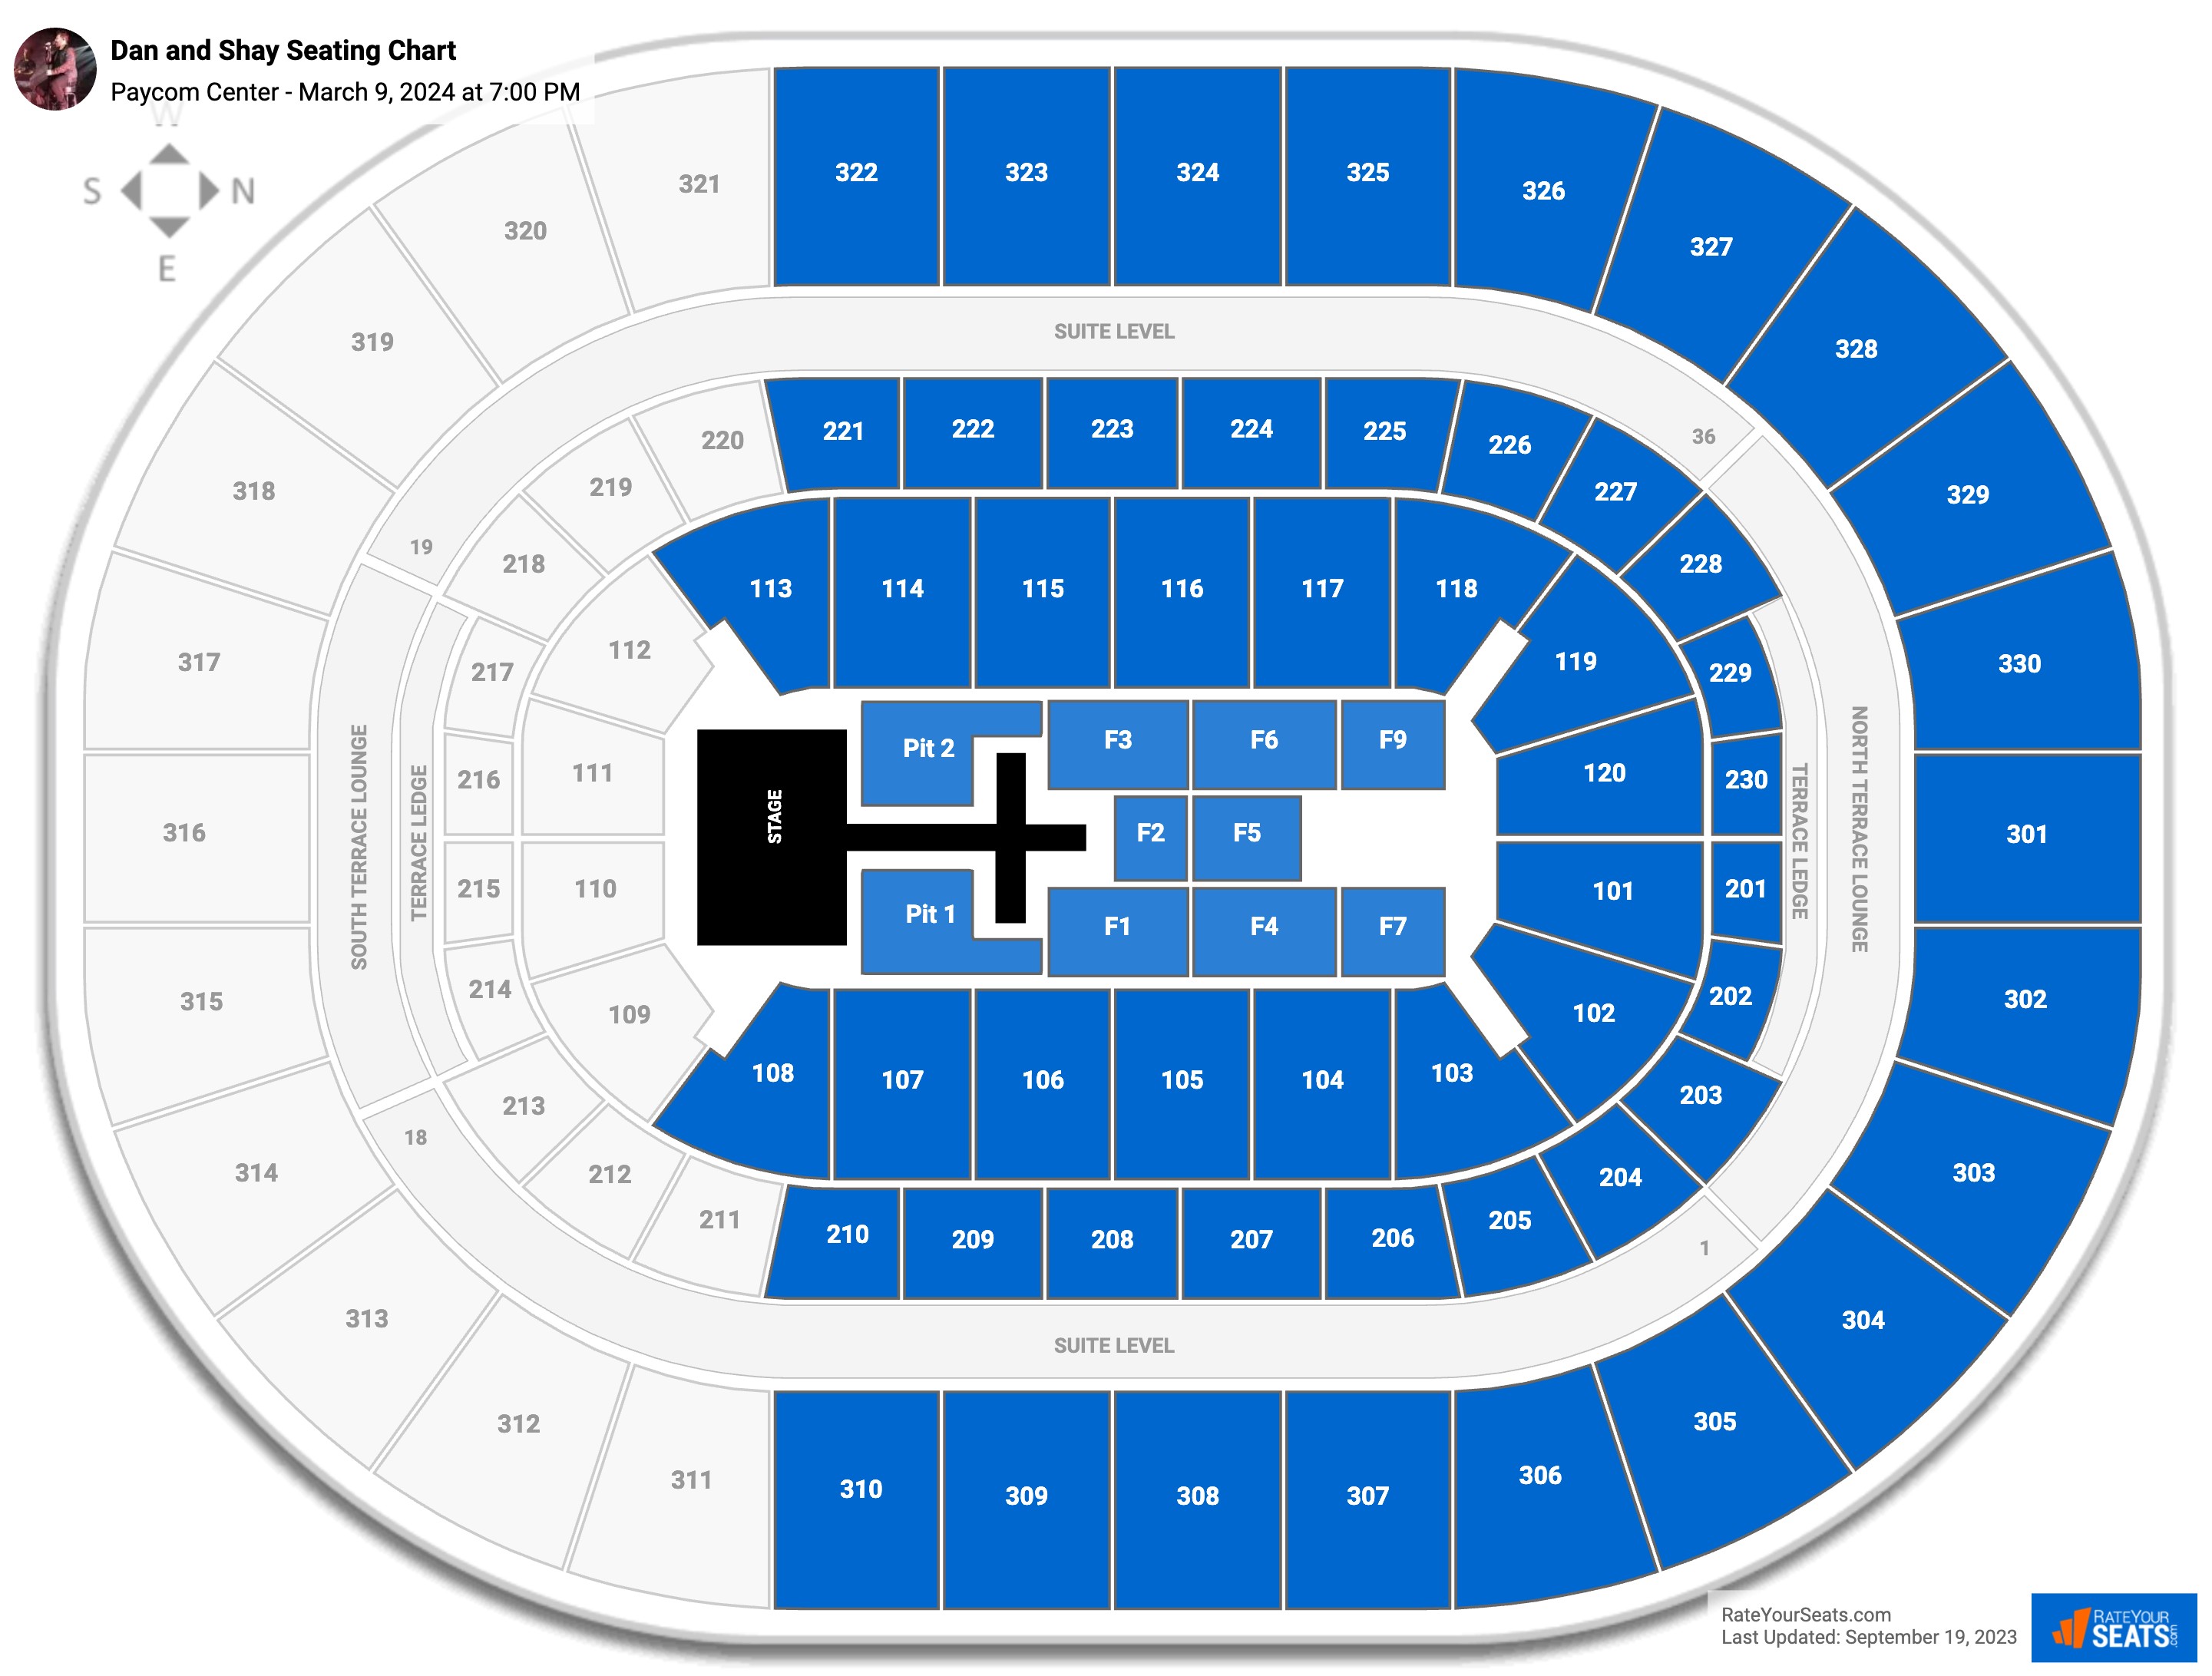 Paycom Center Concert Seating Chart - RateYourSeats.com